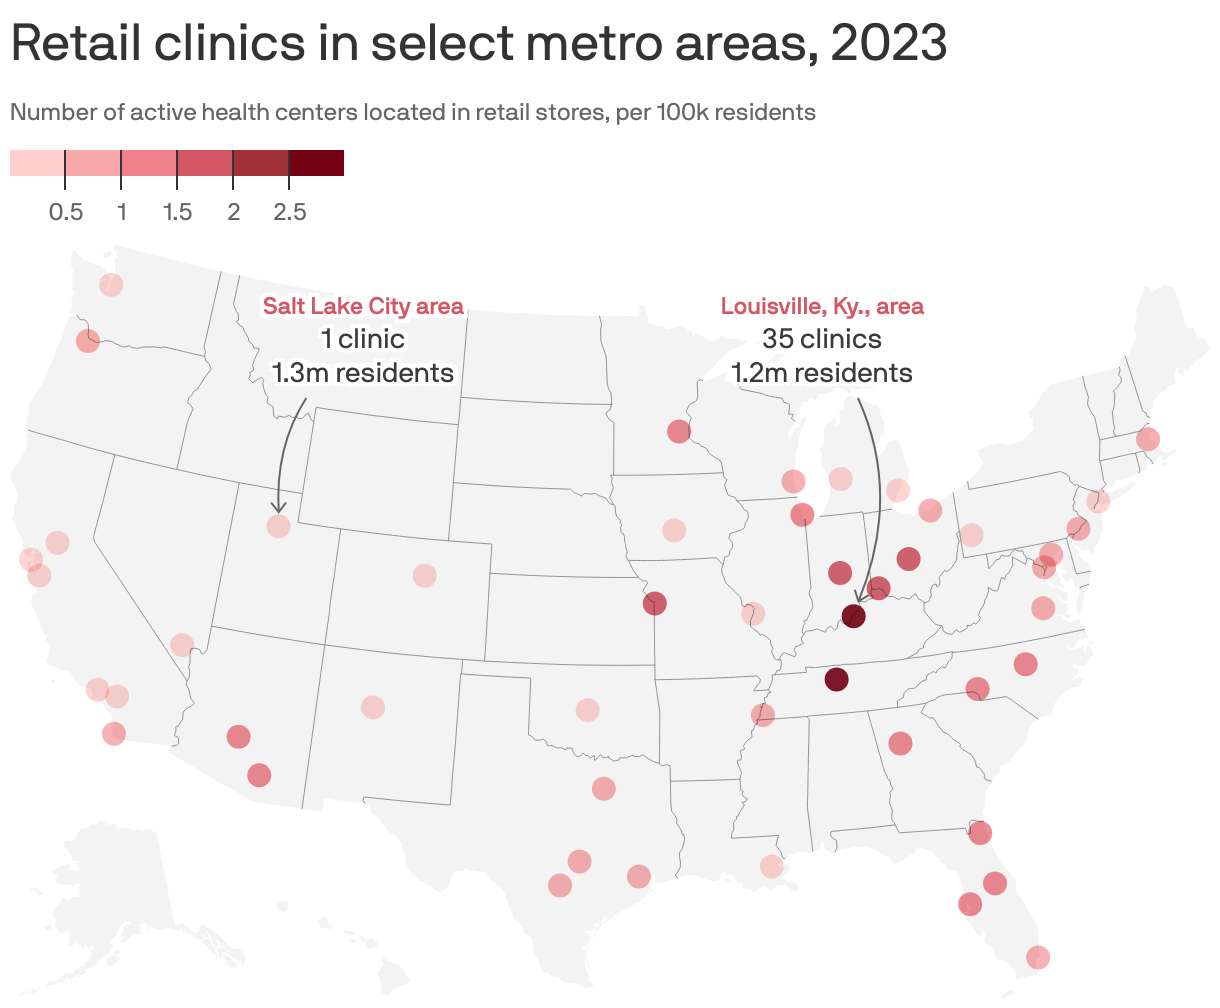 Retail clinics in select metro areas, 2023